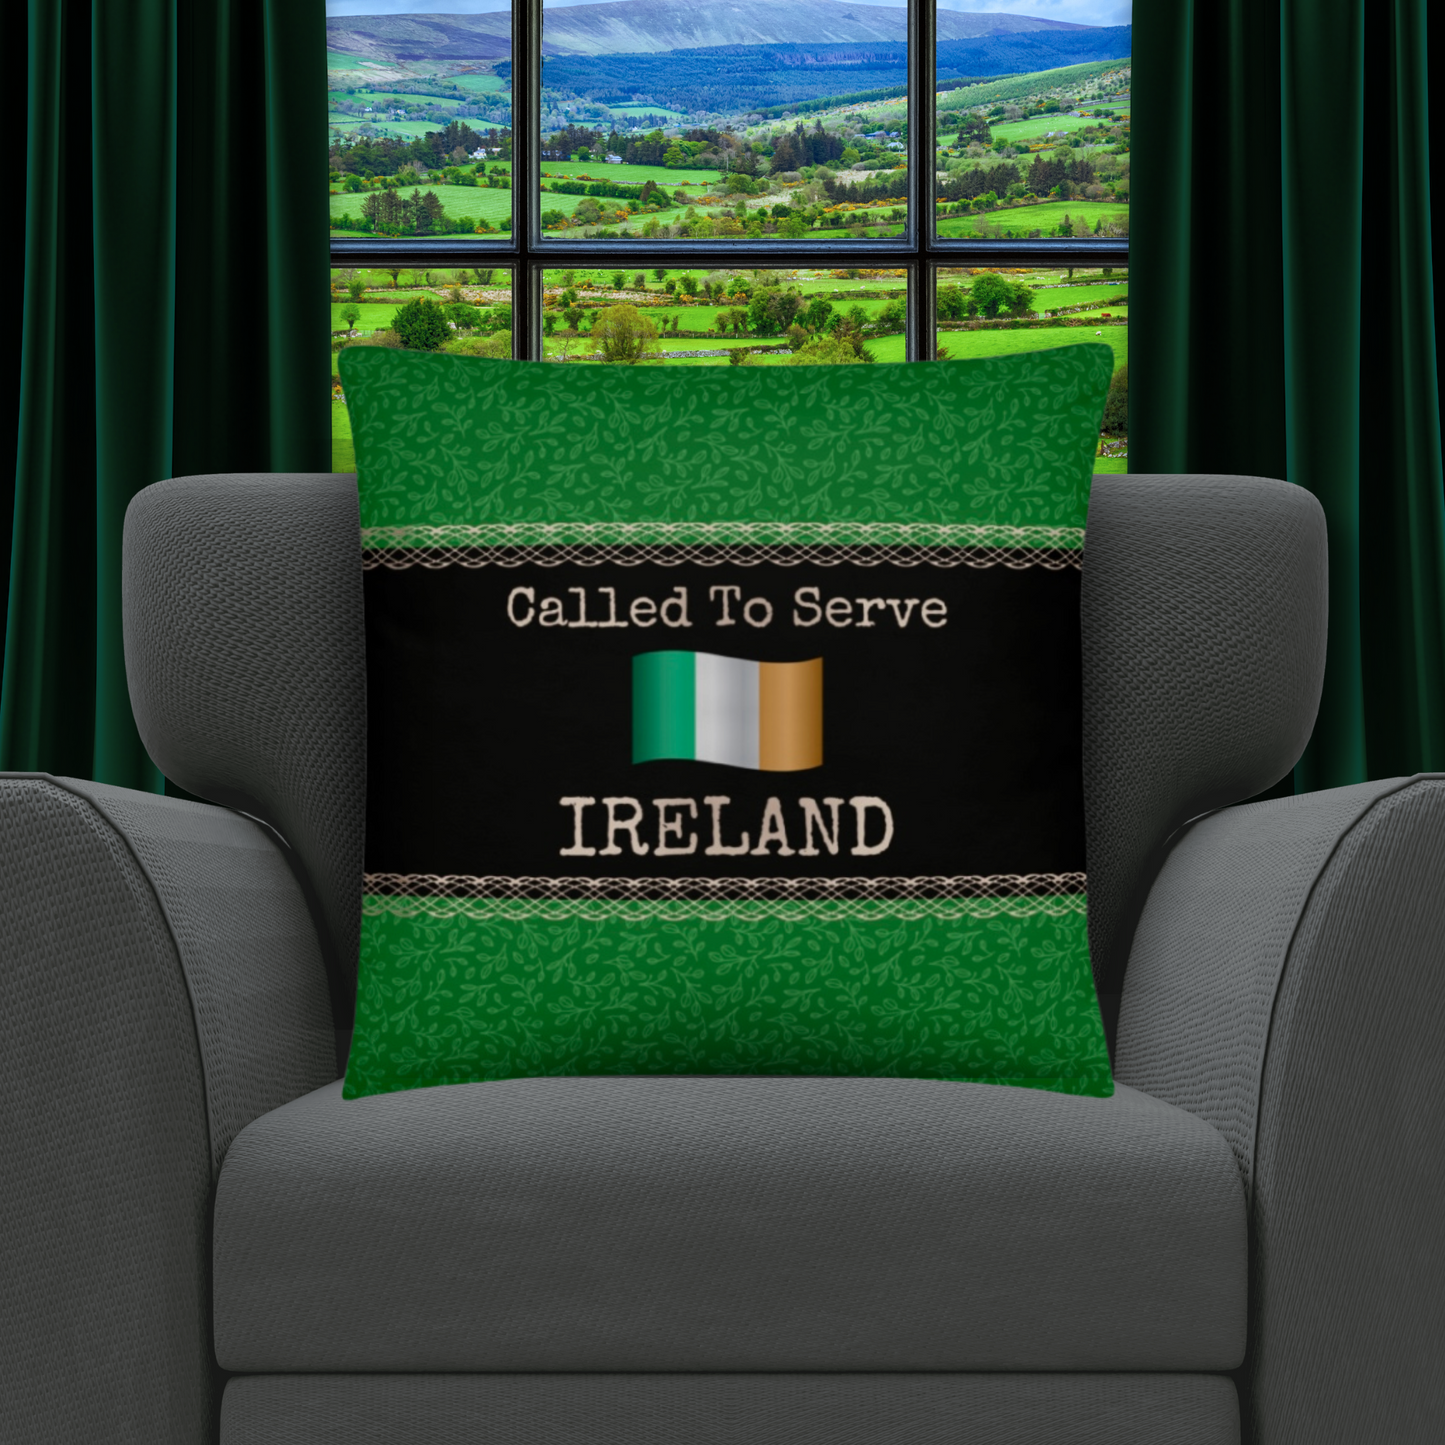 Ireland Missionary Gift | Best Missionary Gift Ideas | Mission Call Gifts | Called to Serve Gifts | Missionary Mom Gifts | Best Latter Day Saint Gifts | LDS Missionary Gifts | Ireland Home Decor